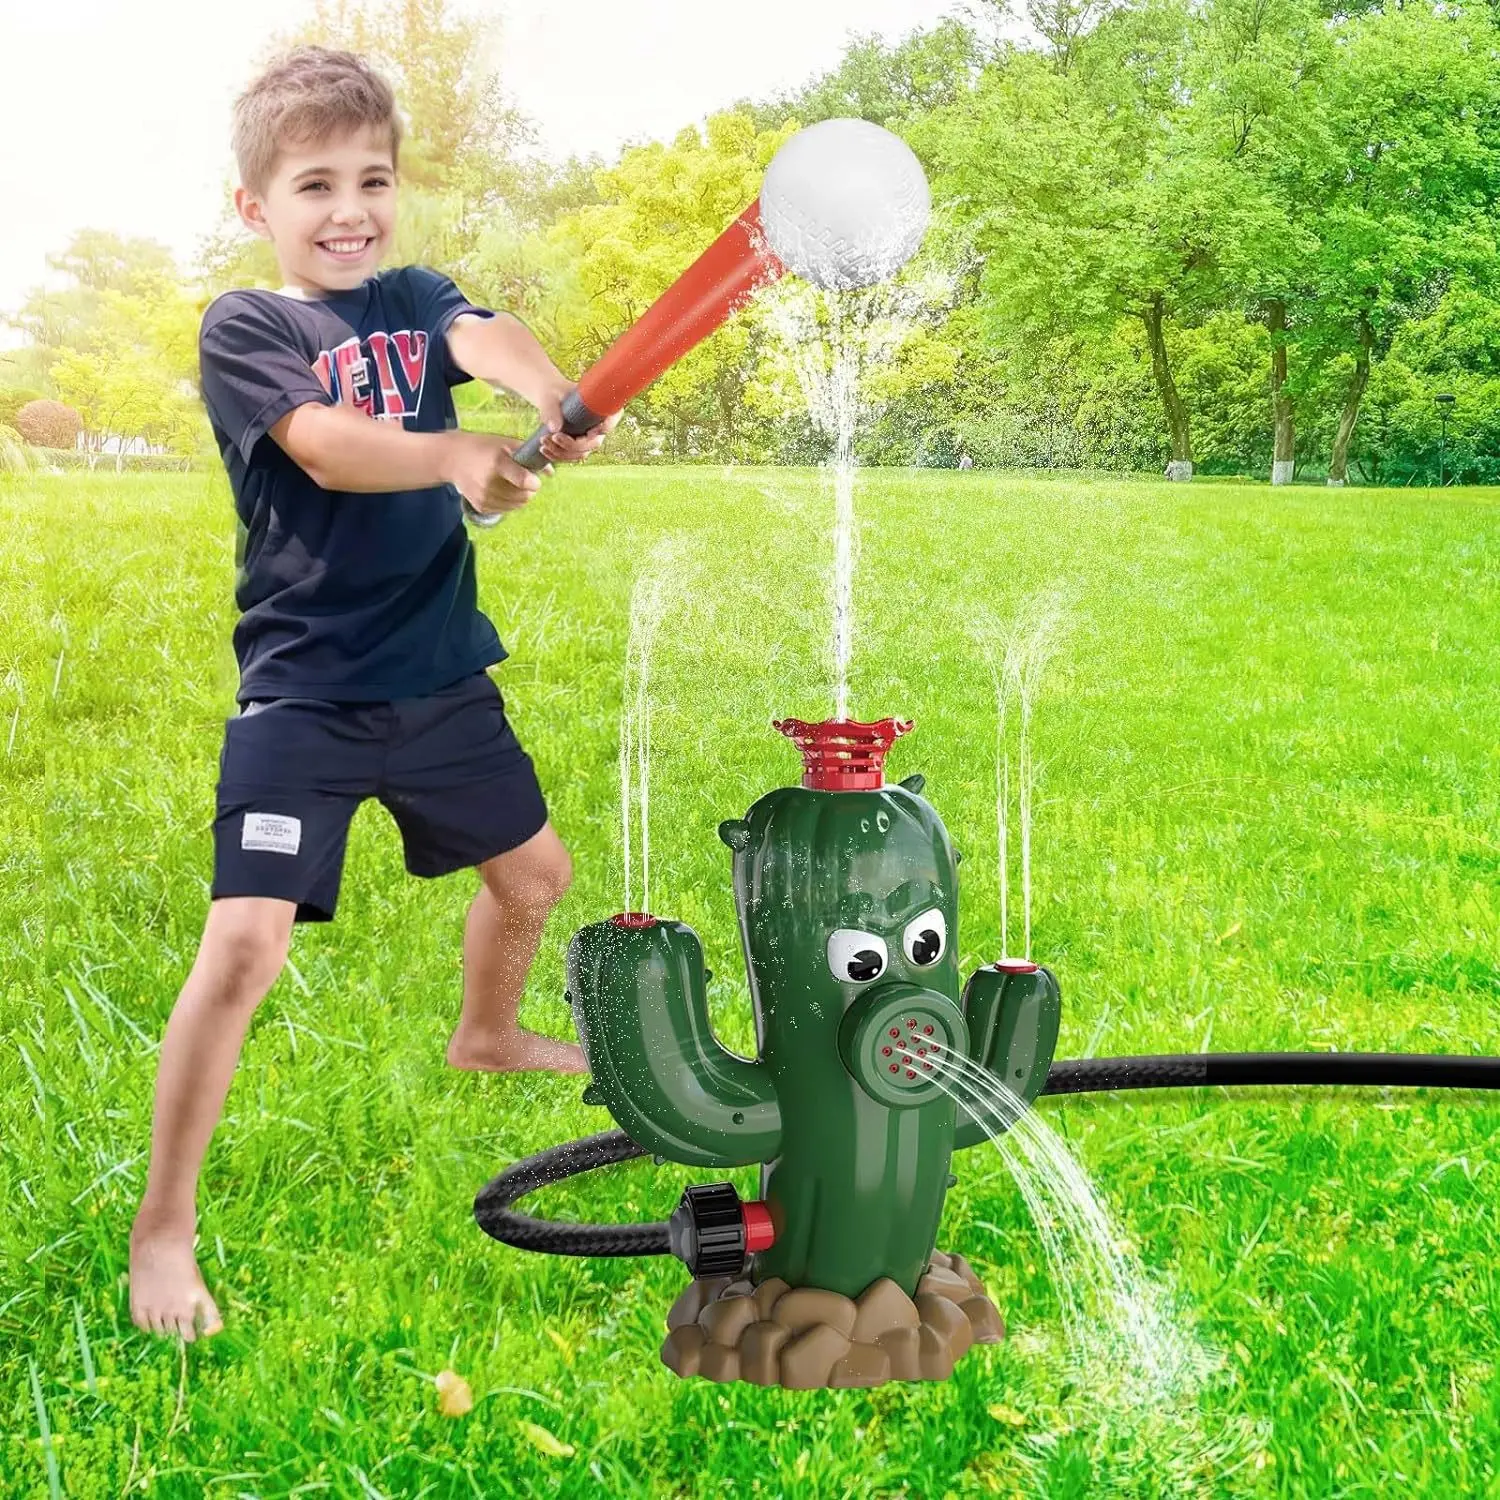 

Water Sprinkler Baseball Toy,Cactus Water Play for Kids,Summer Outside Toys Lawn Backyard Water Fun Game Pool Party,Boys Girls